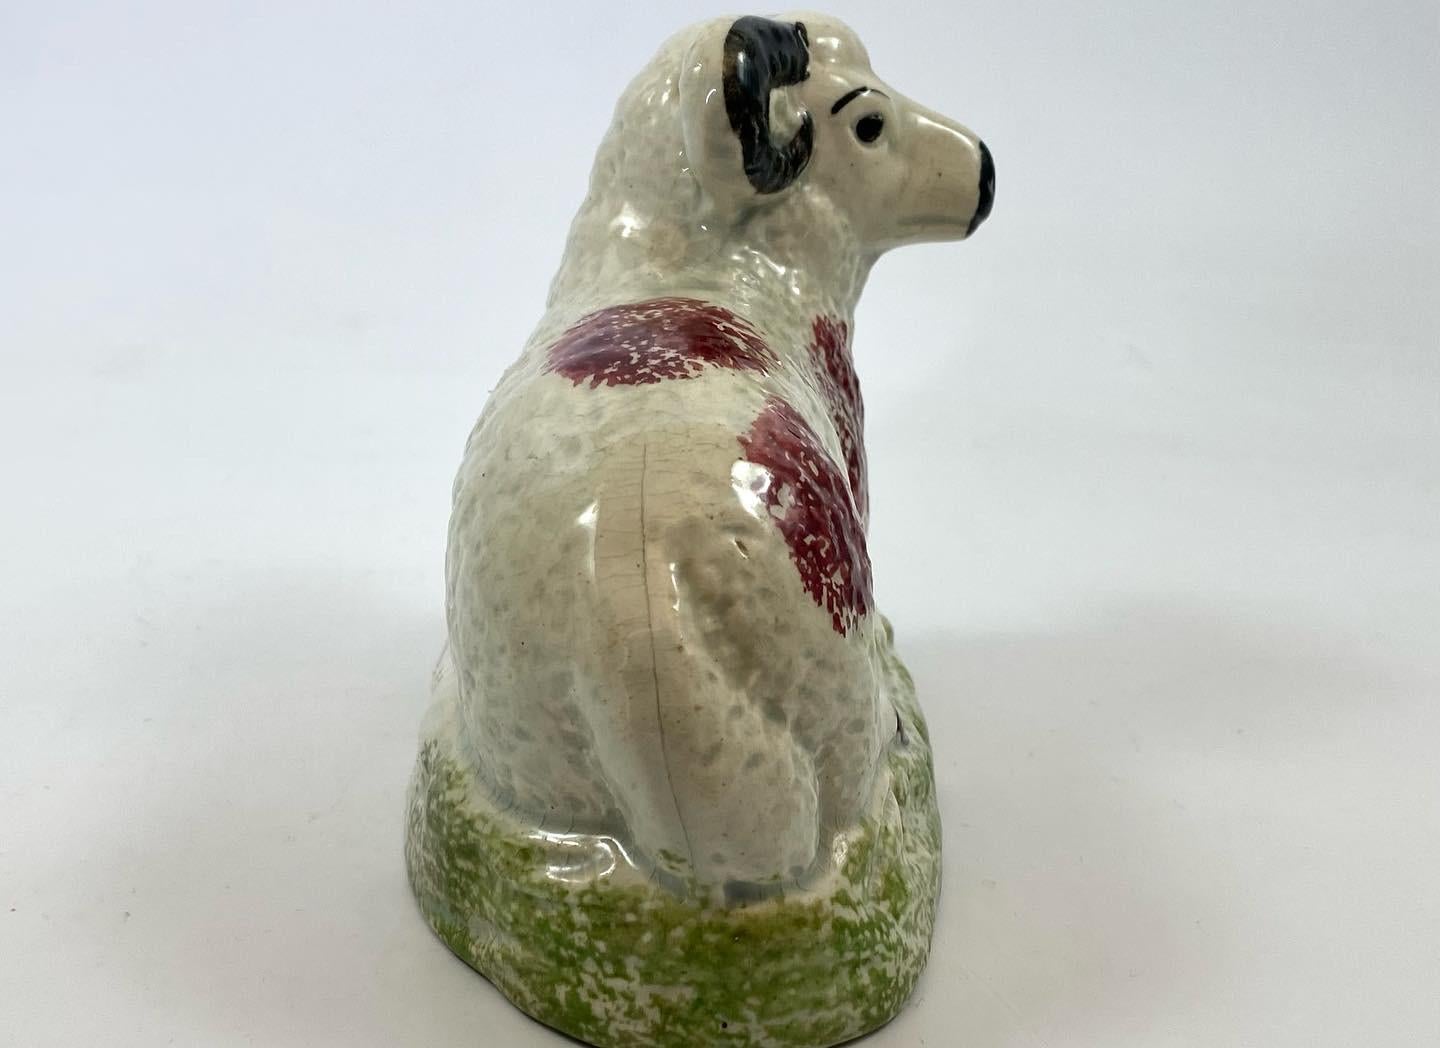 A large English pottery pearlware ram, c. 1830. The recumbent ram, sponged with puce glazed spots, black horns, snout and eyes, upon an oval mound base, sponged in green. All under a pearlware glaze.
North East English, or possibly Scottish